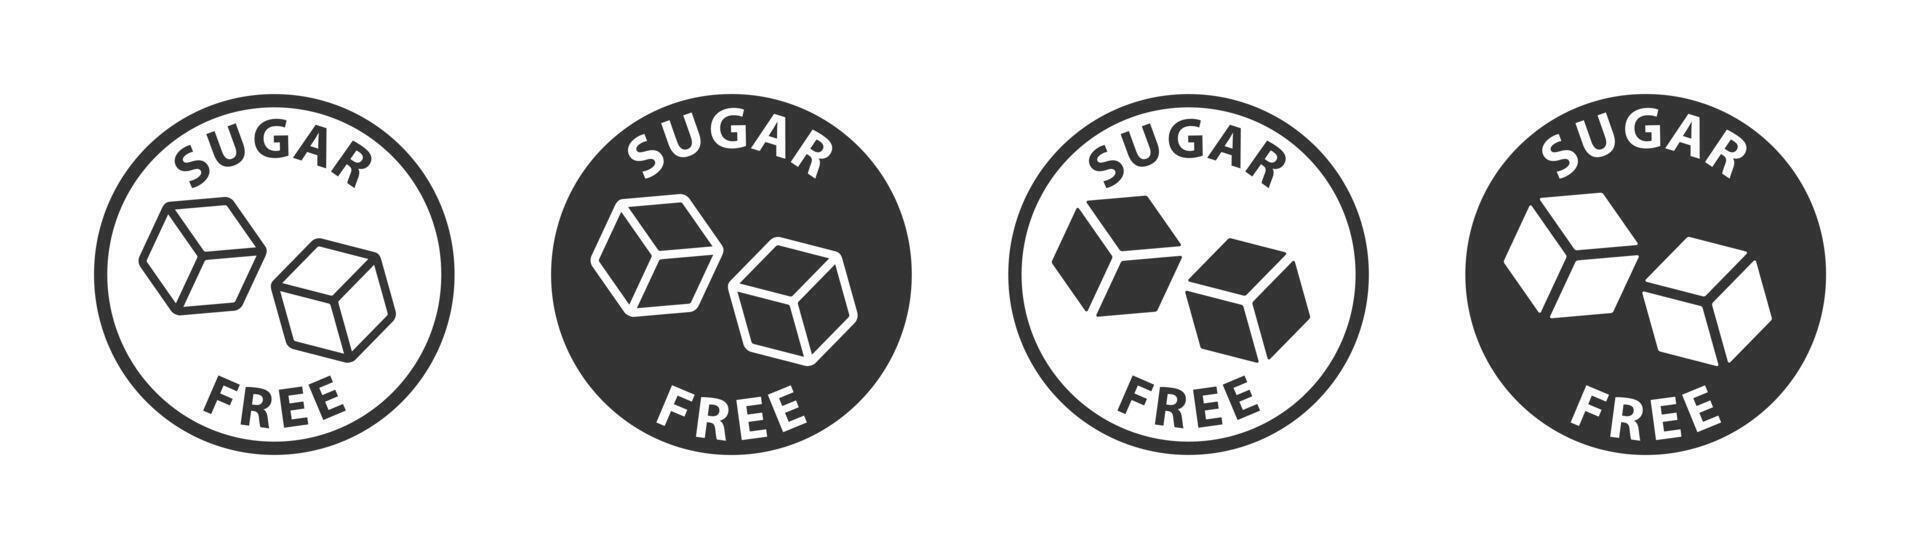 Sugar Free Icon Sign. Sugar cubes in circle icon for no sugar added product package design. Vector illustration.